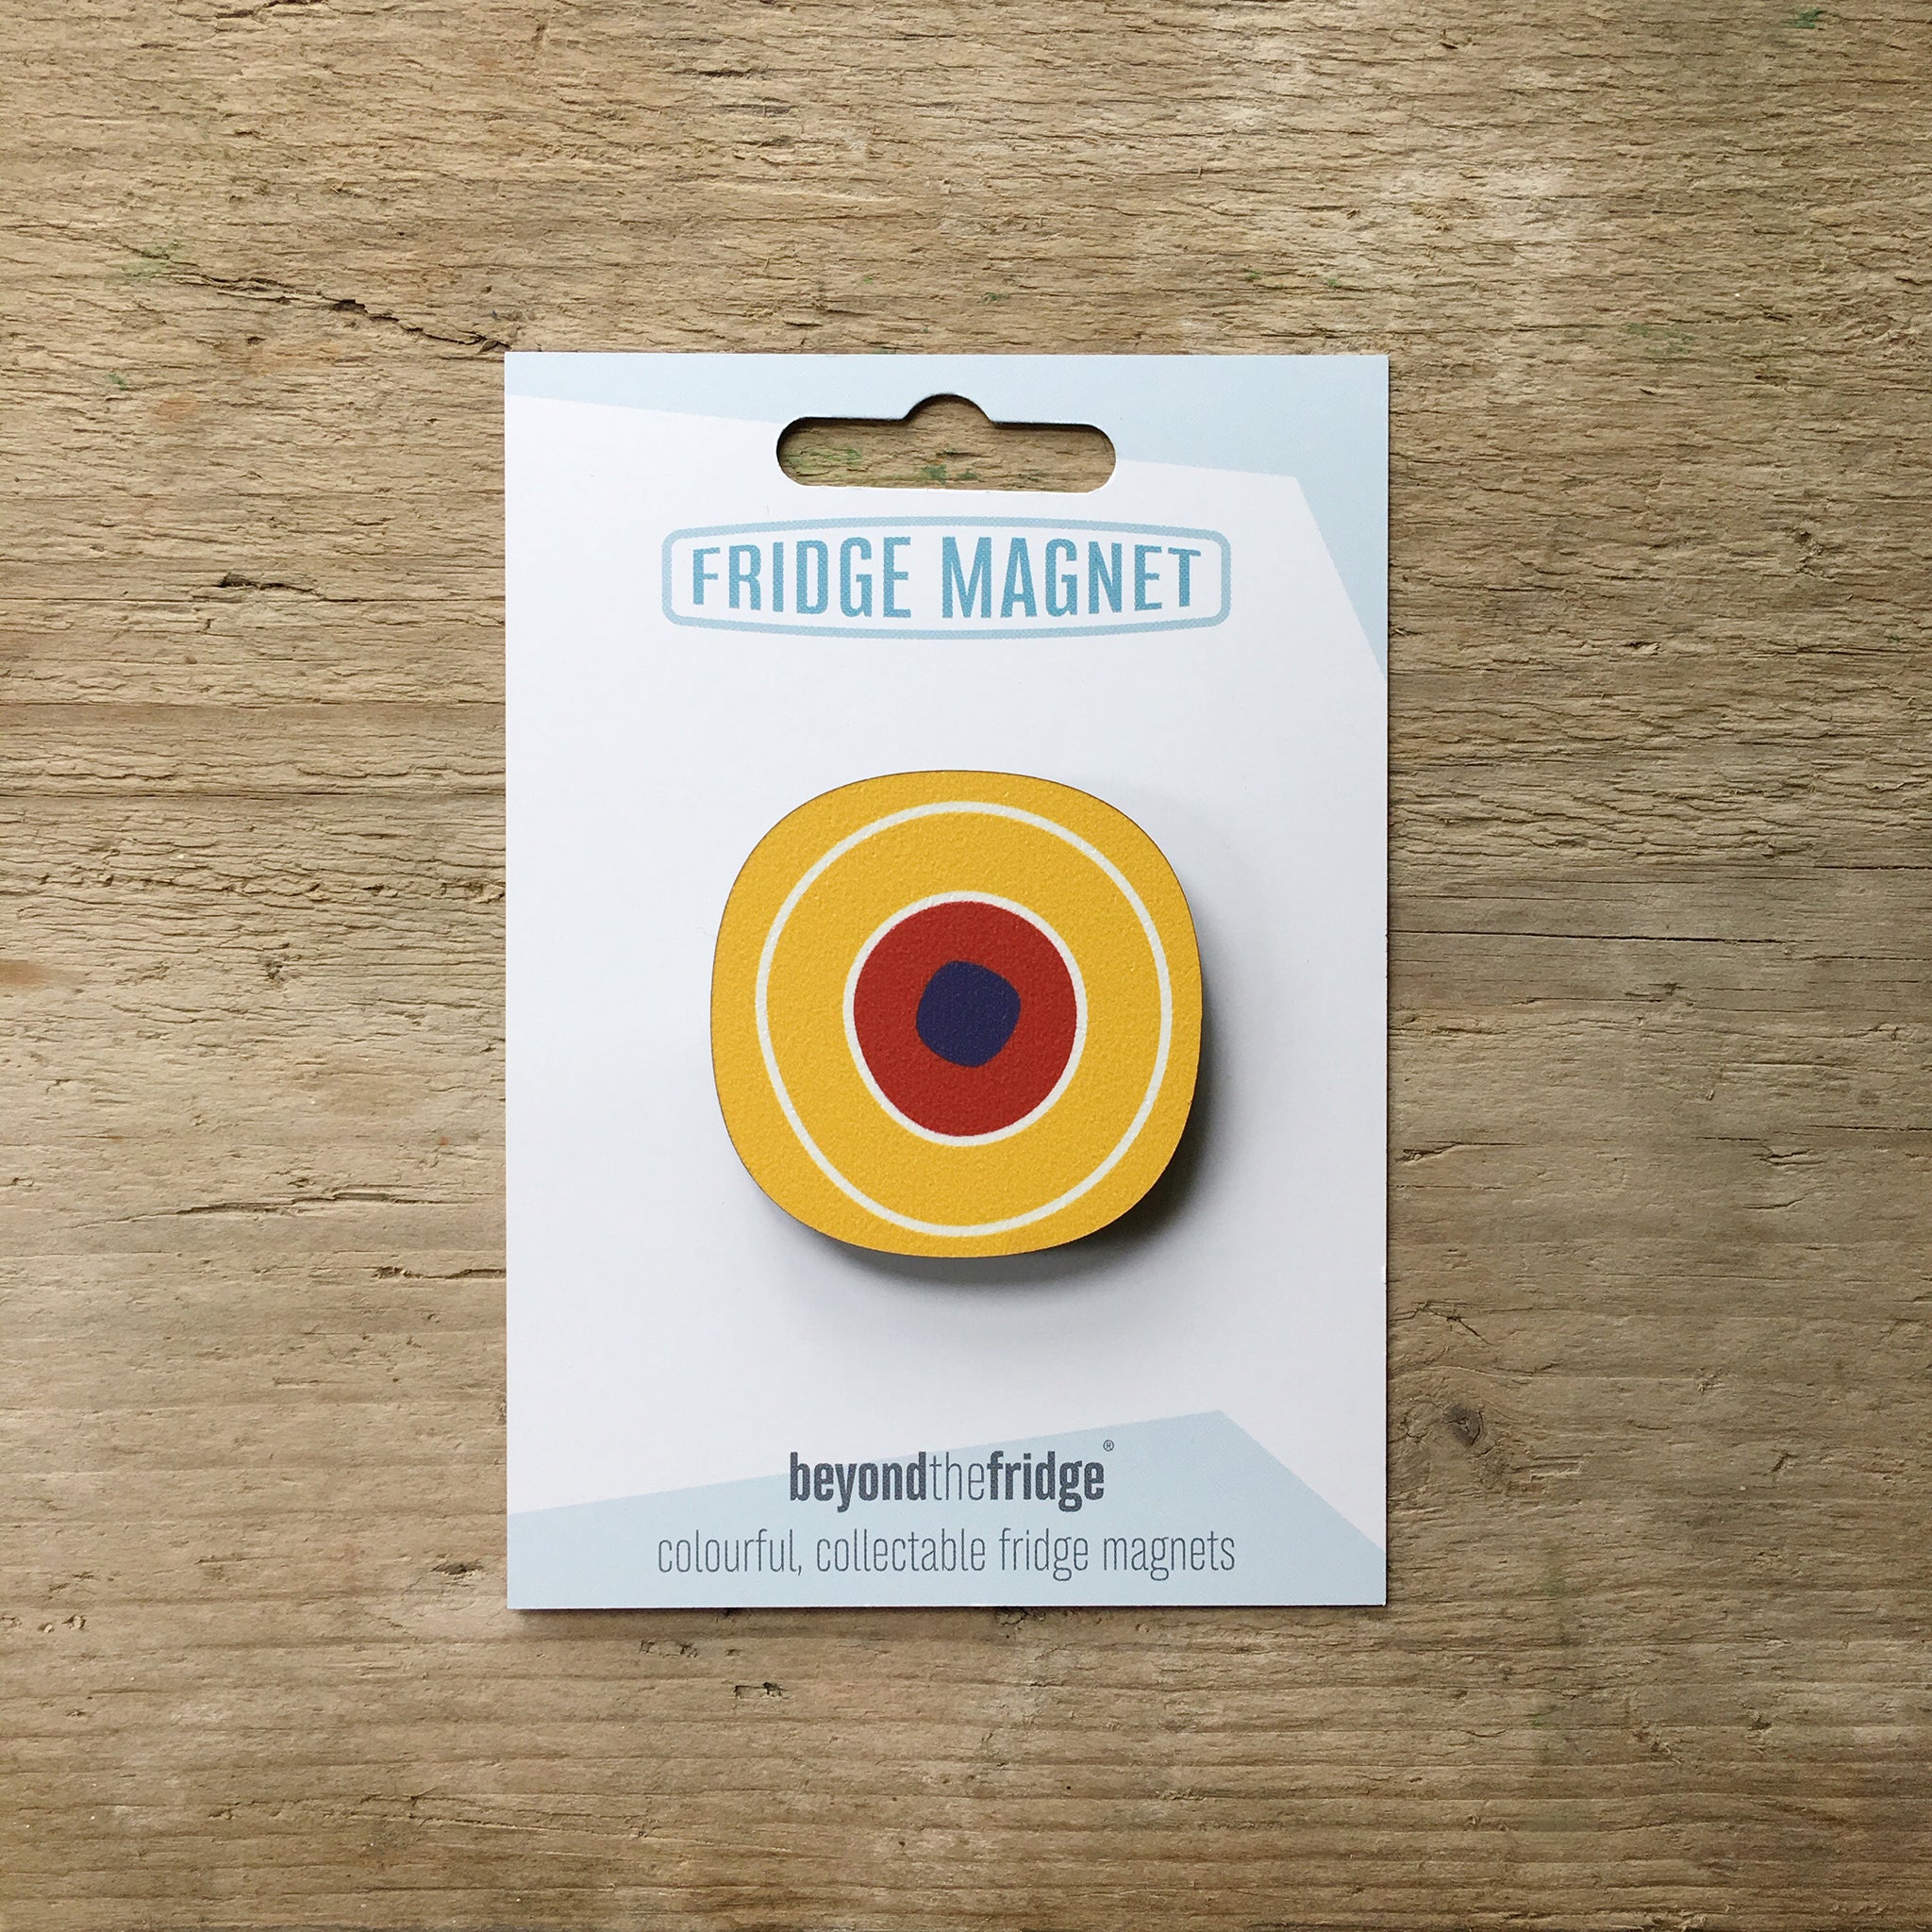 A yellow circle millefiori design plywood fridge magnet by Beyond the Fridge in it’s pack on a wooden background